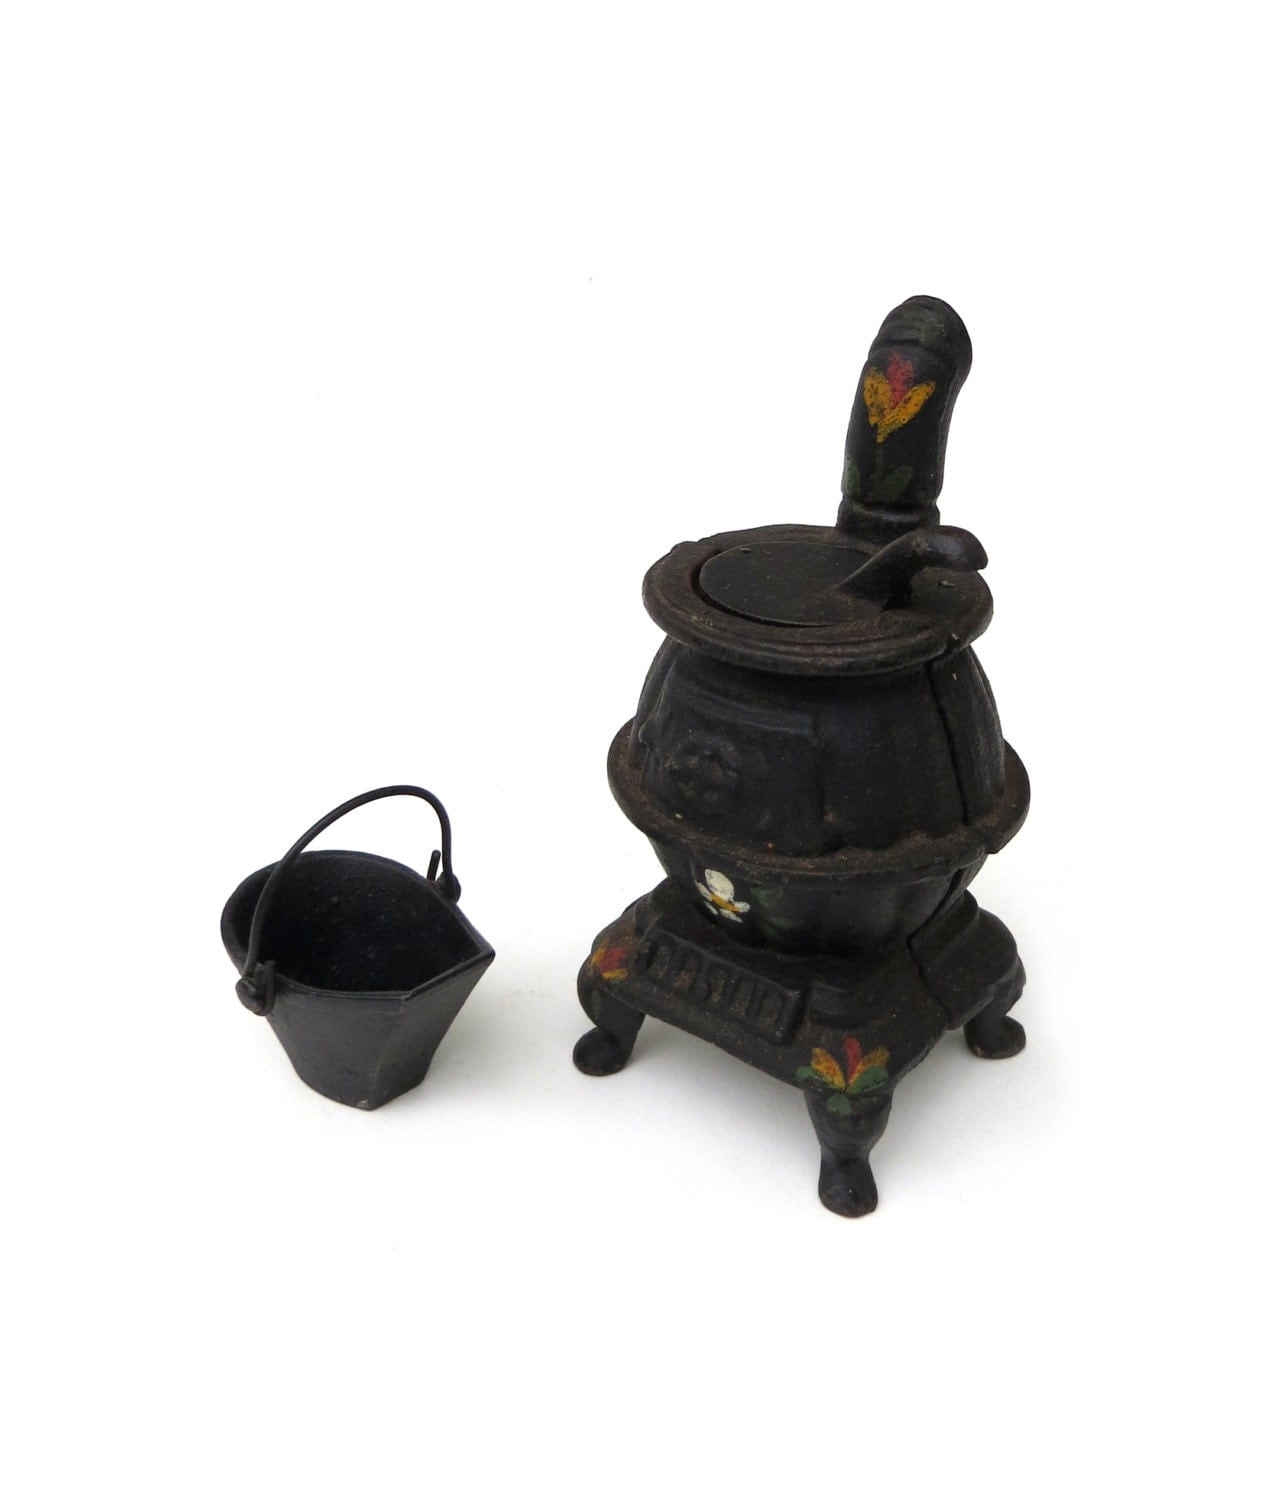 Vintage Miniature Pot Belly Stove and Coal Bucket Cast Iron